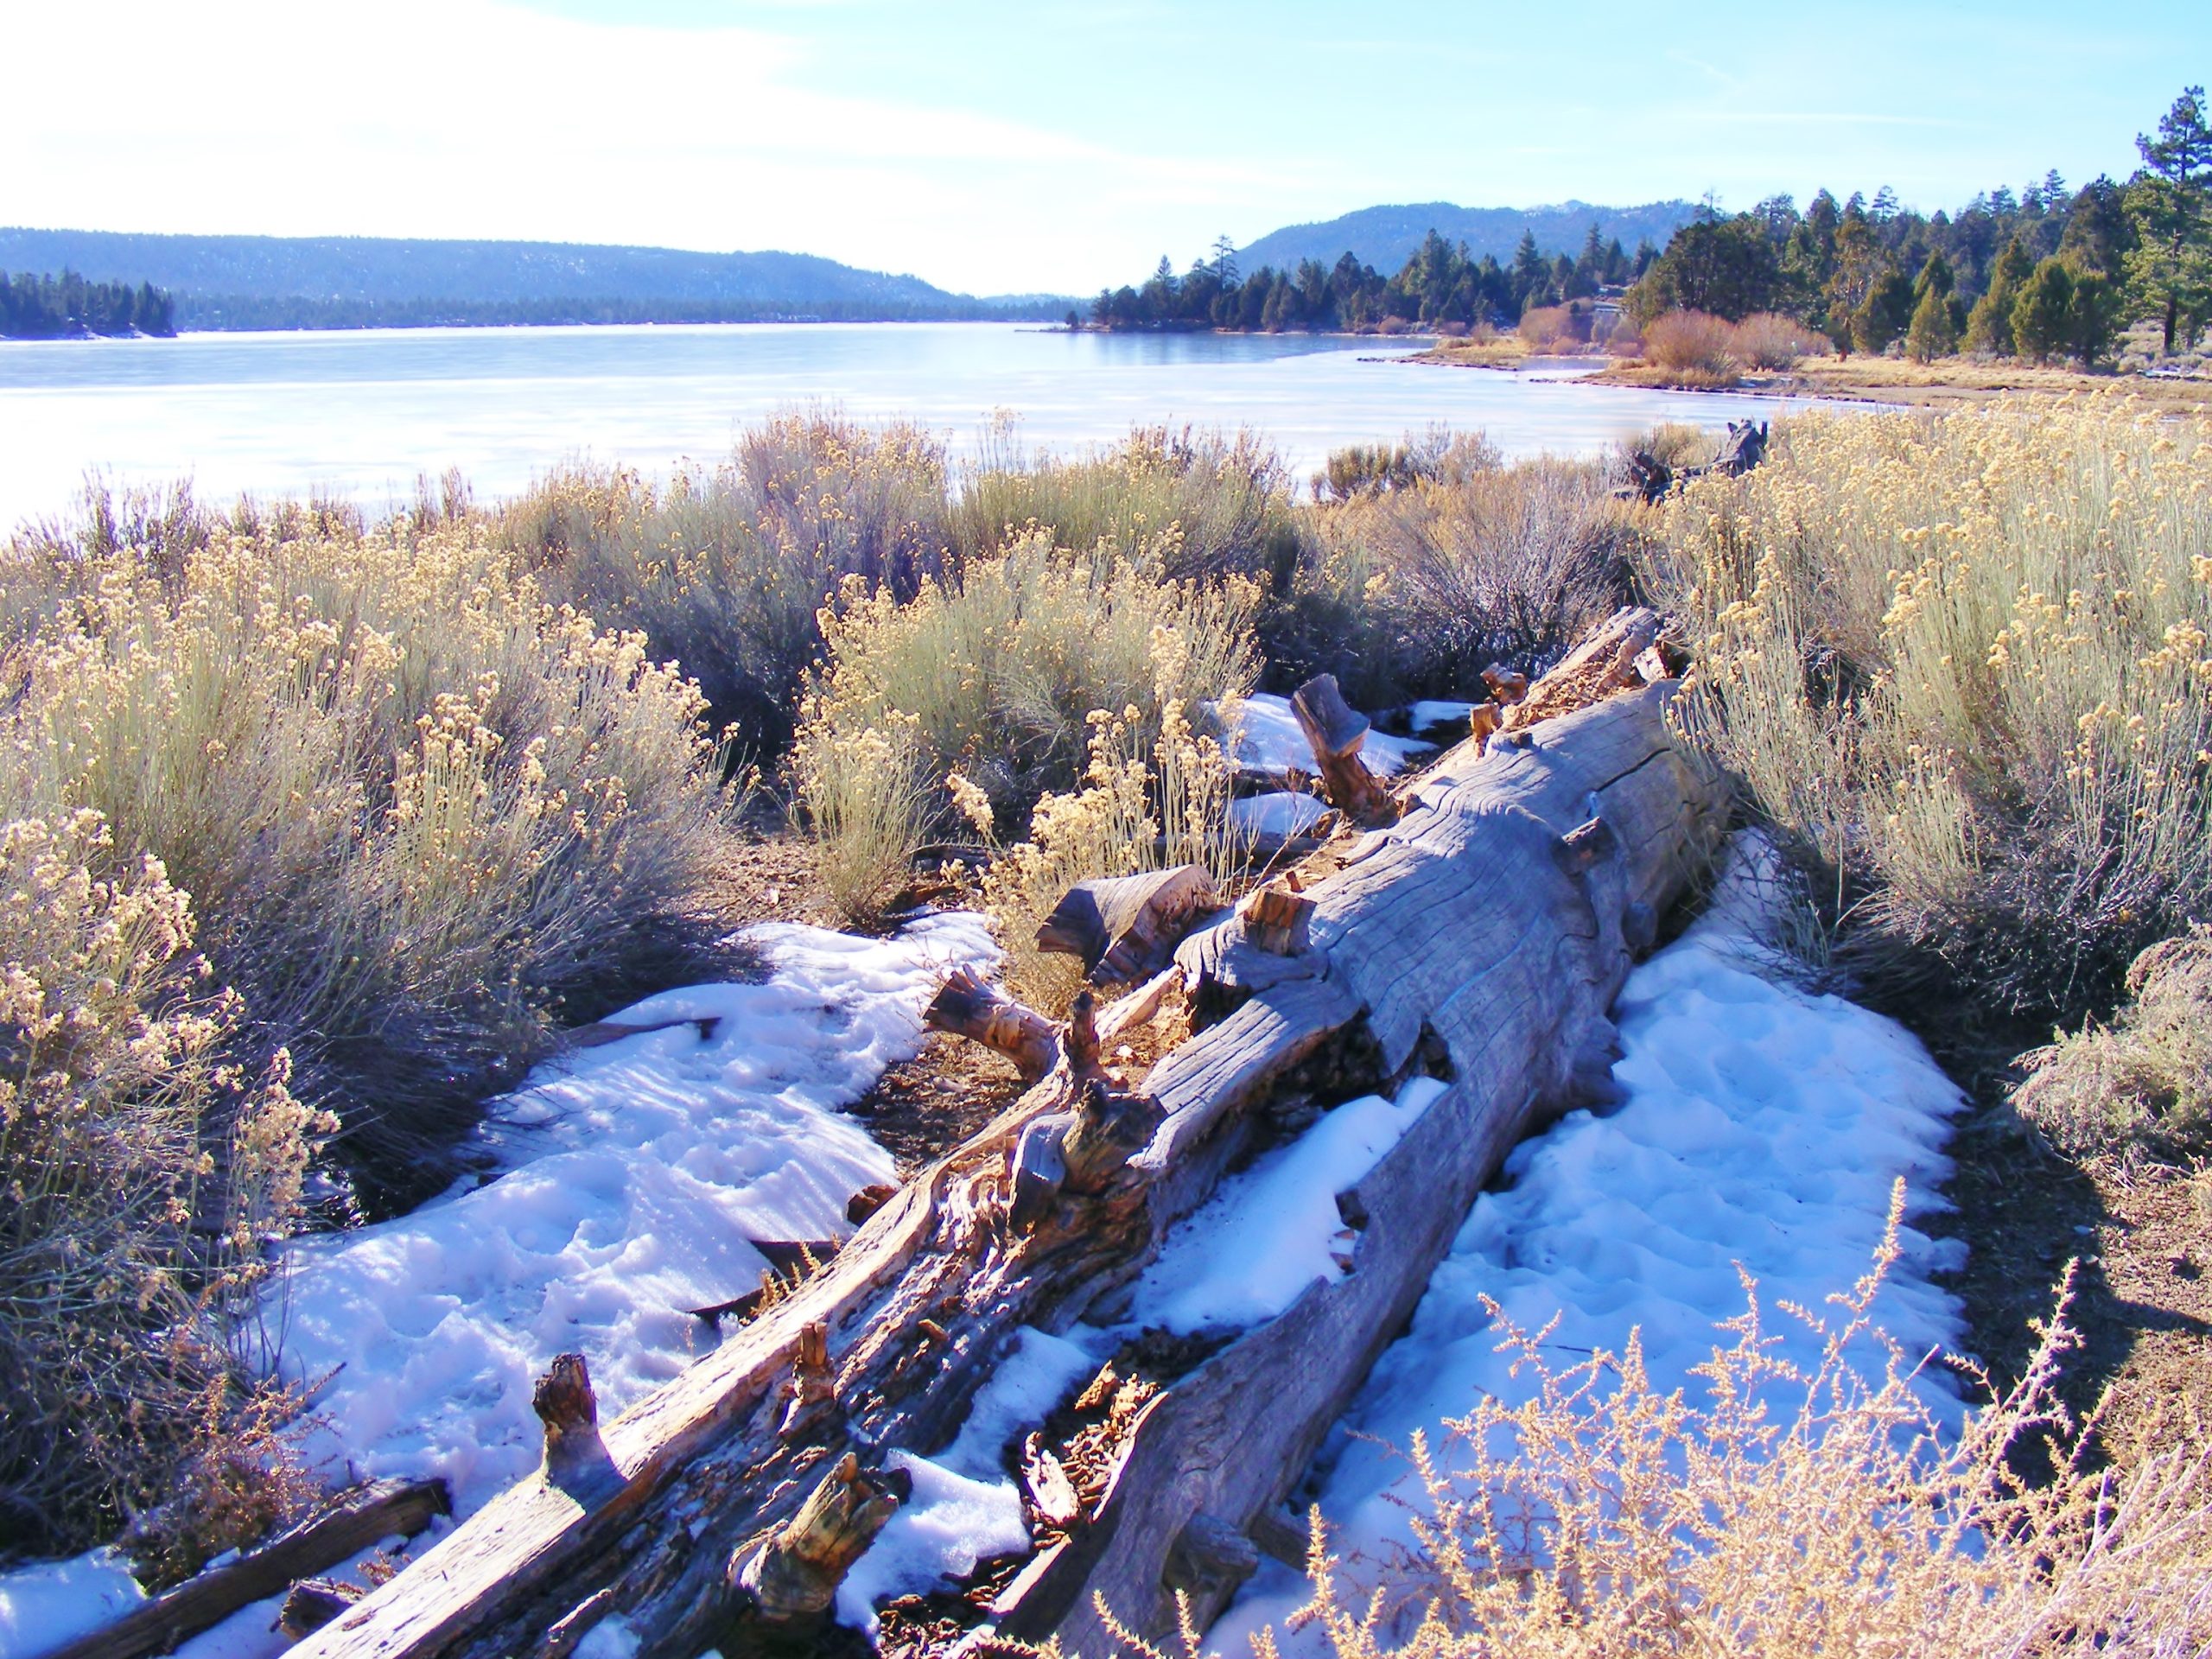 A fallen log in snow with Big Bear Lake in the background.